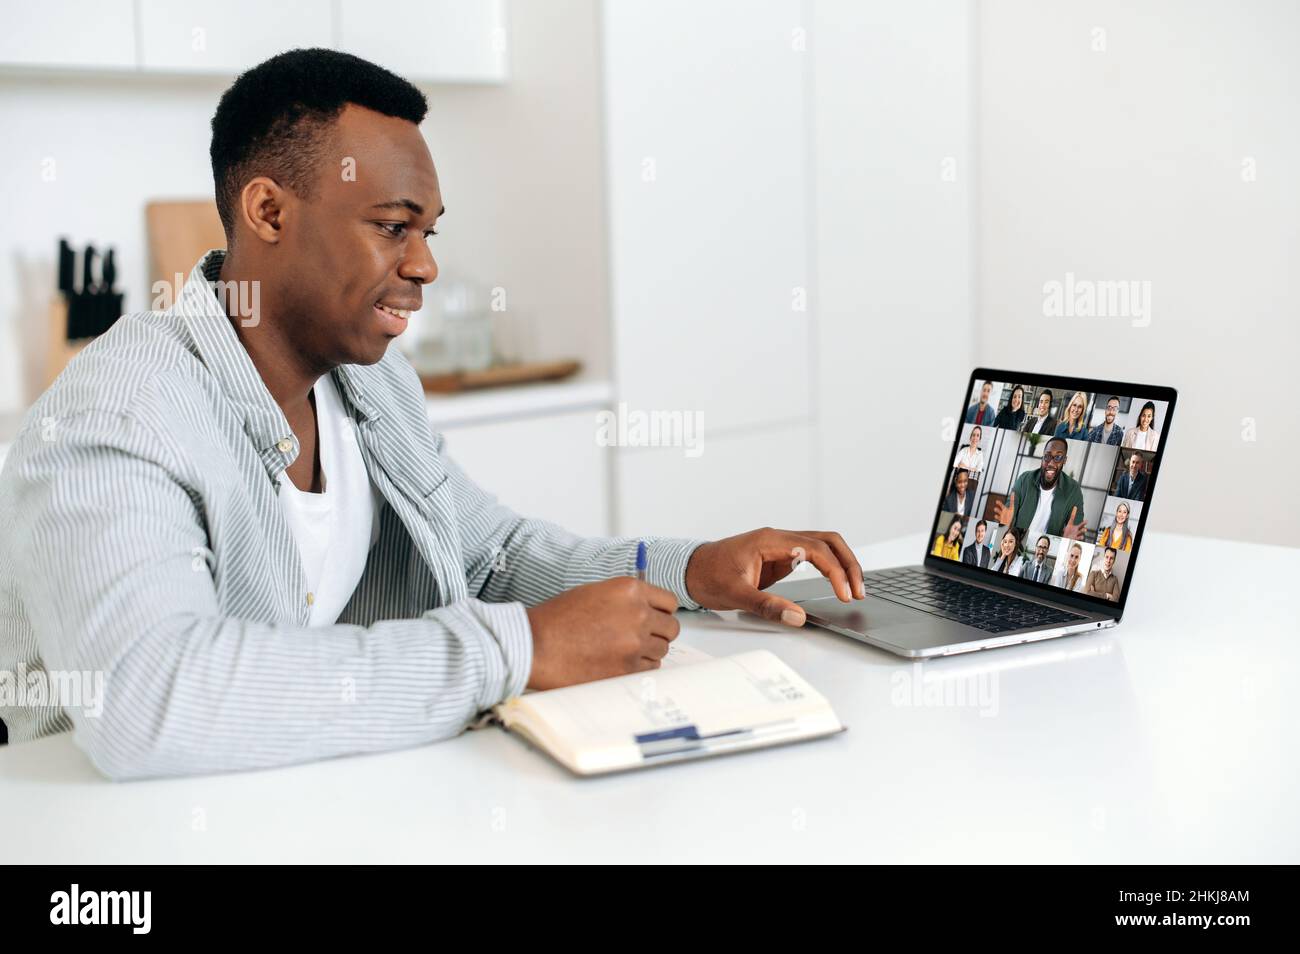 Smart positive african american man sits at a table at home, using a laptop, takes part in a multi-rice video conference with colleagues or employees, takes notes. E-learning concept. Work from home Stock Photo